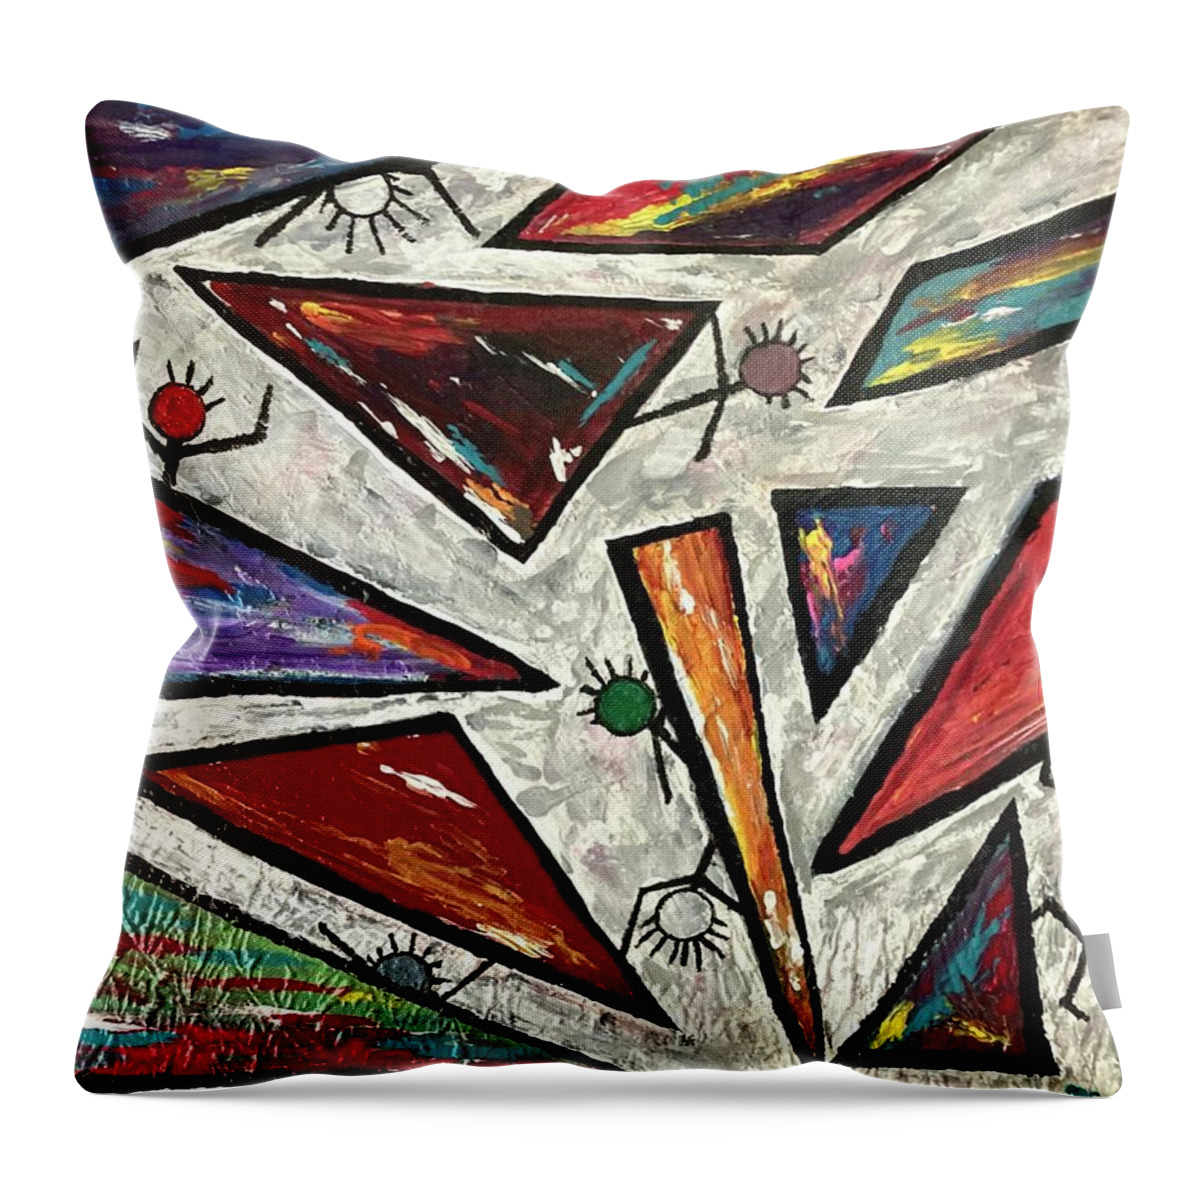 Oil Throw Pillow featuring the painting Triangulate by Mike Coyne